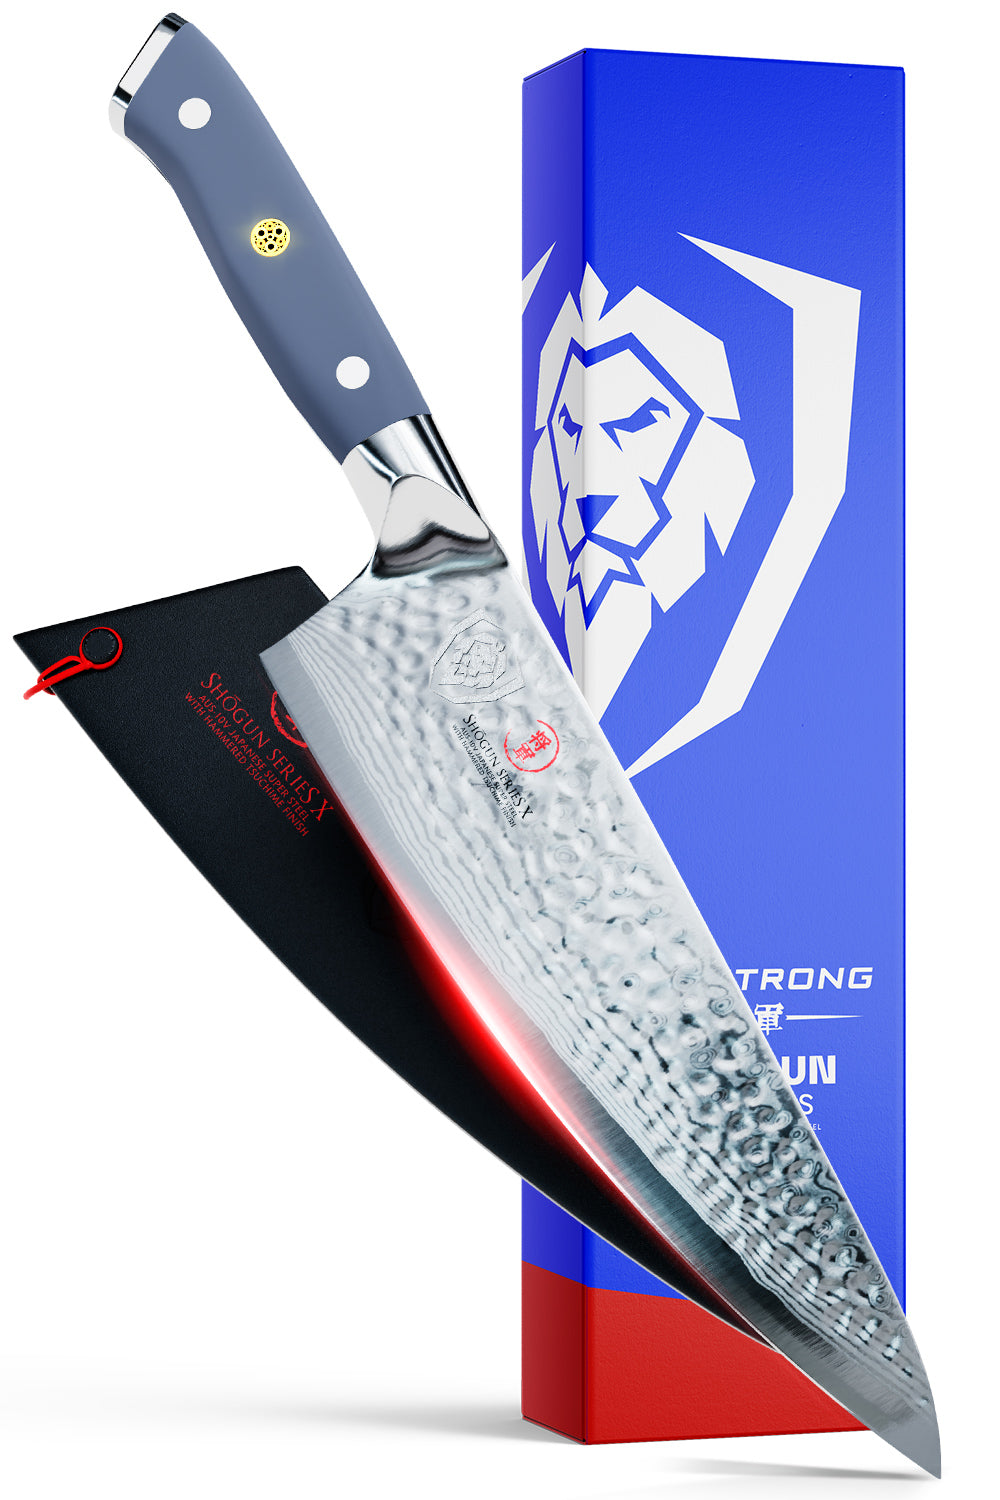 Dalstrong shogun series 8 inch chef knife with light blue matte handle in front of it's beautiful packaging.